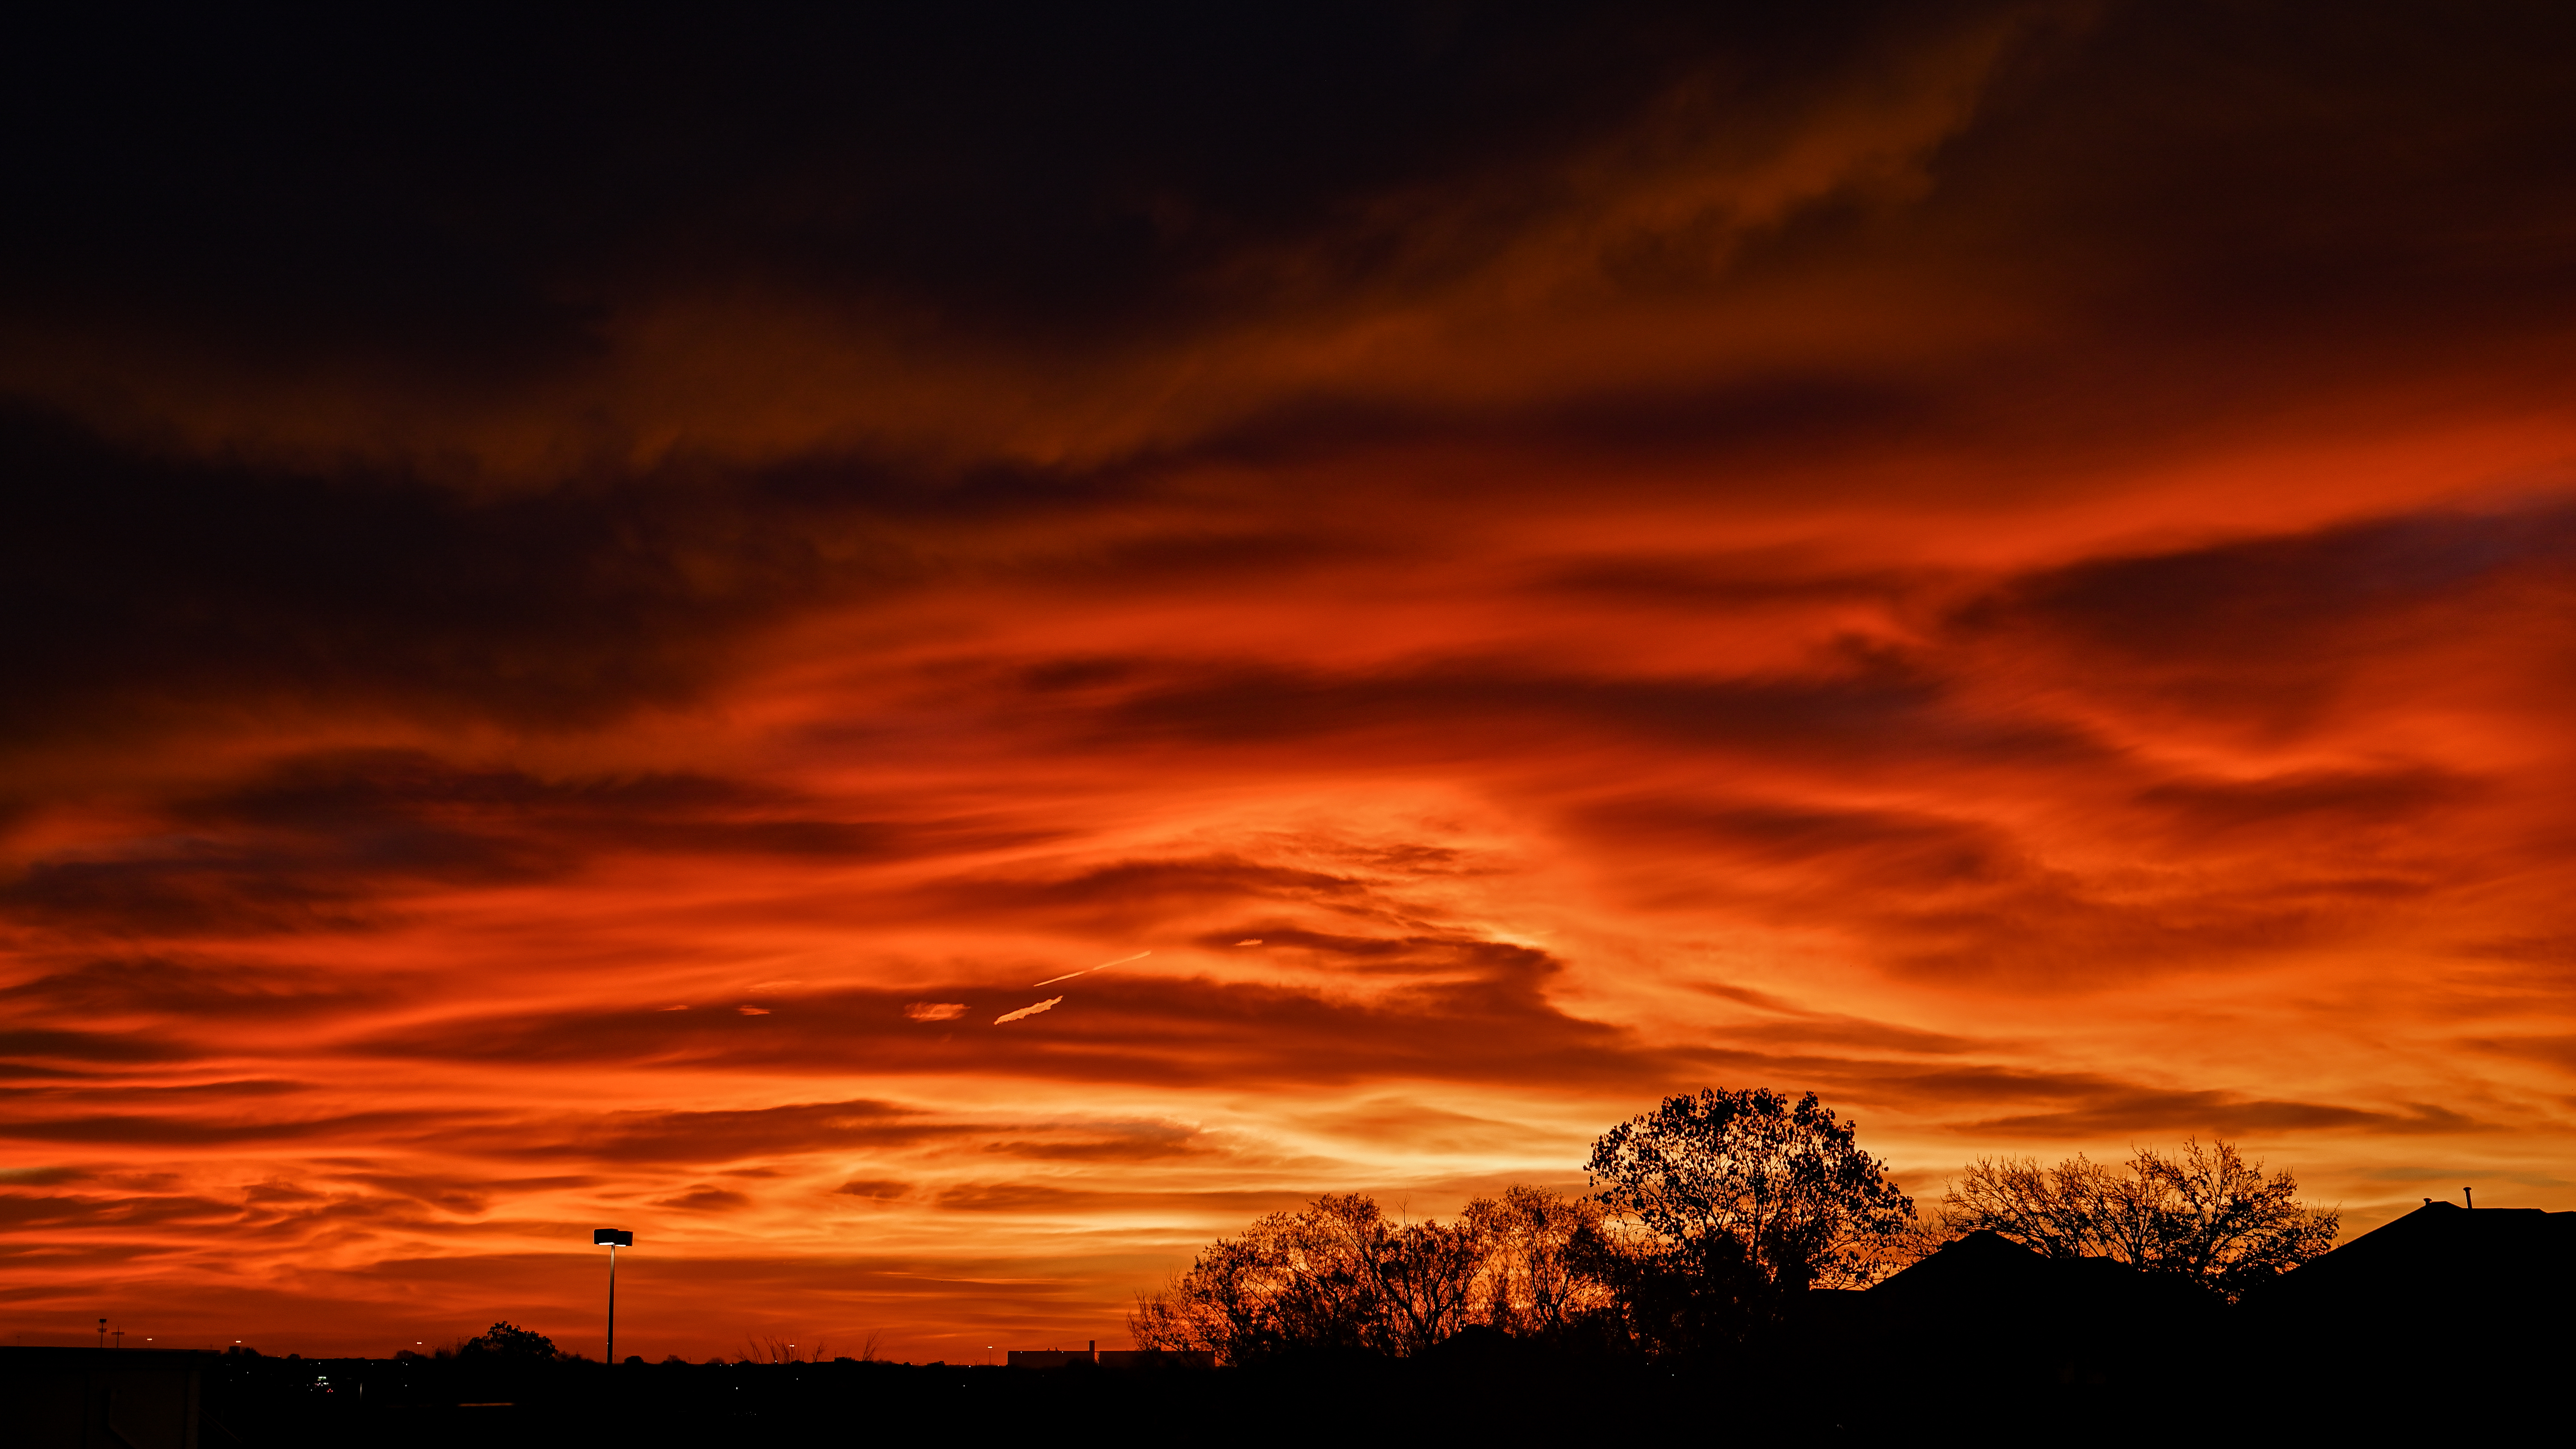 Sunset Nature Landscape Clouds Silhouette Outdoors Red Photography Dusk 6016x3384